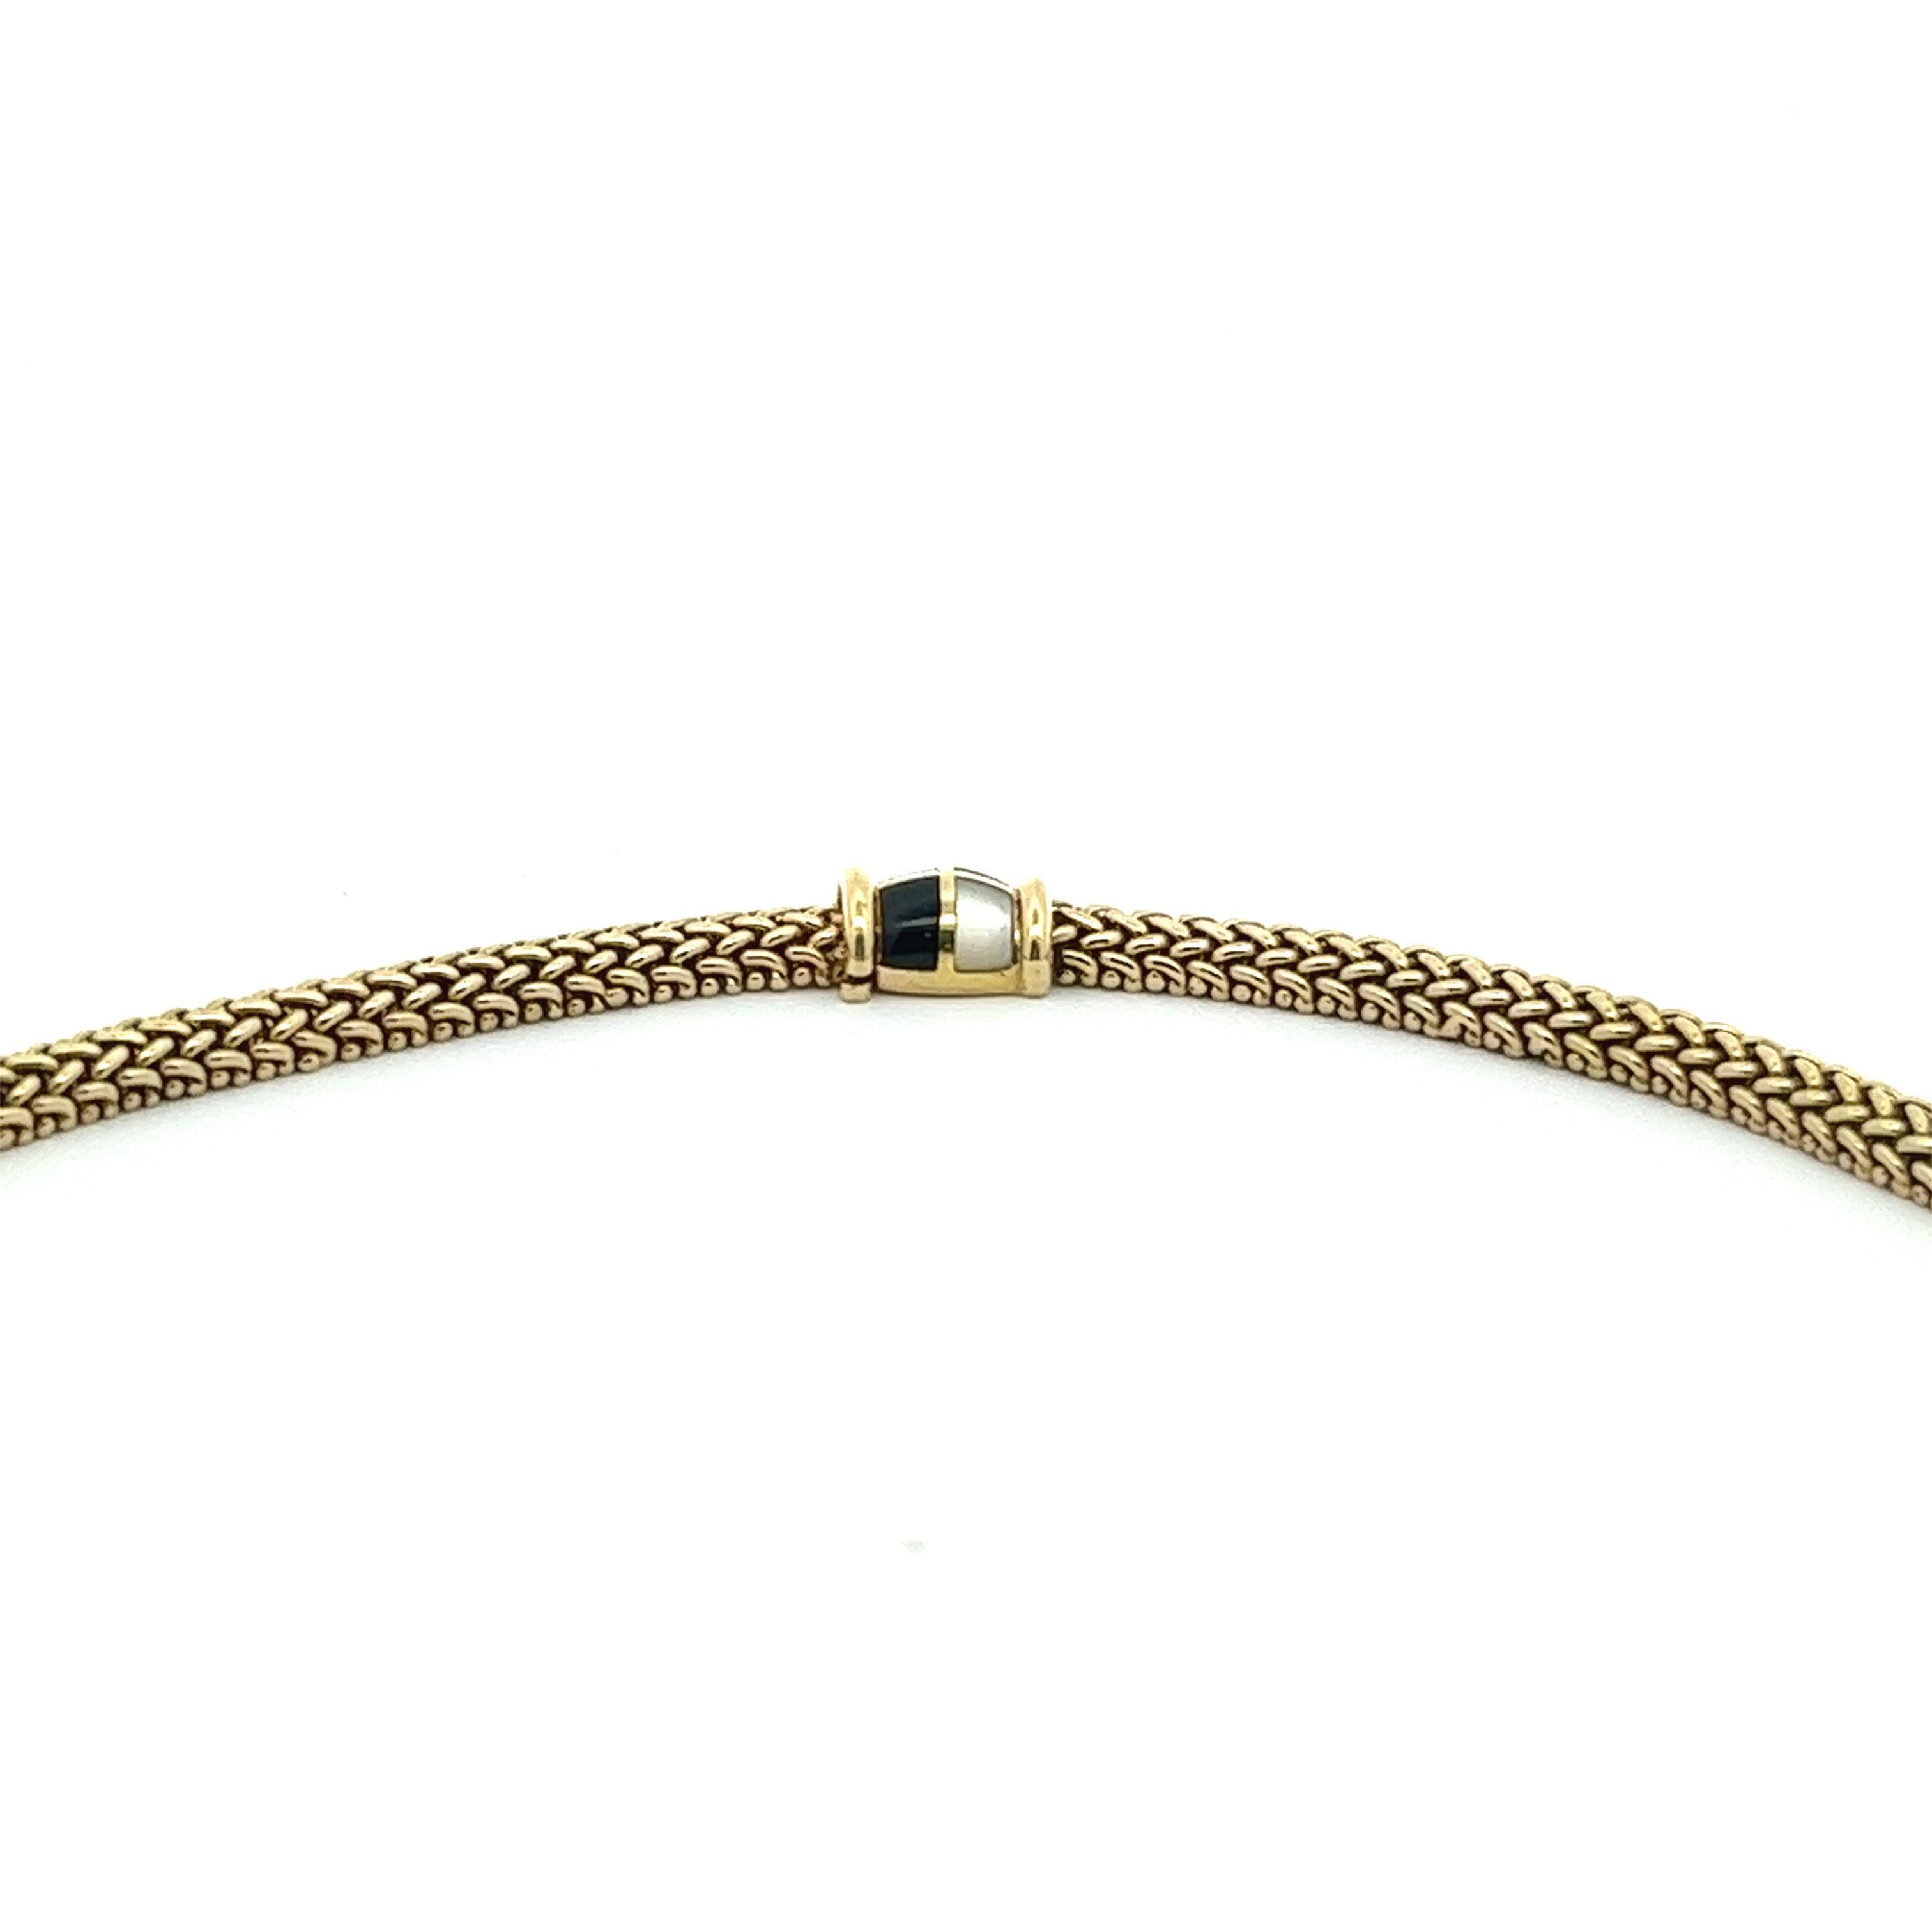 Modern Asch Grossbardt 14 Karat Gold Mesh Necklace with Mother-of-Pearl and Onyx